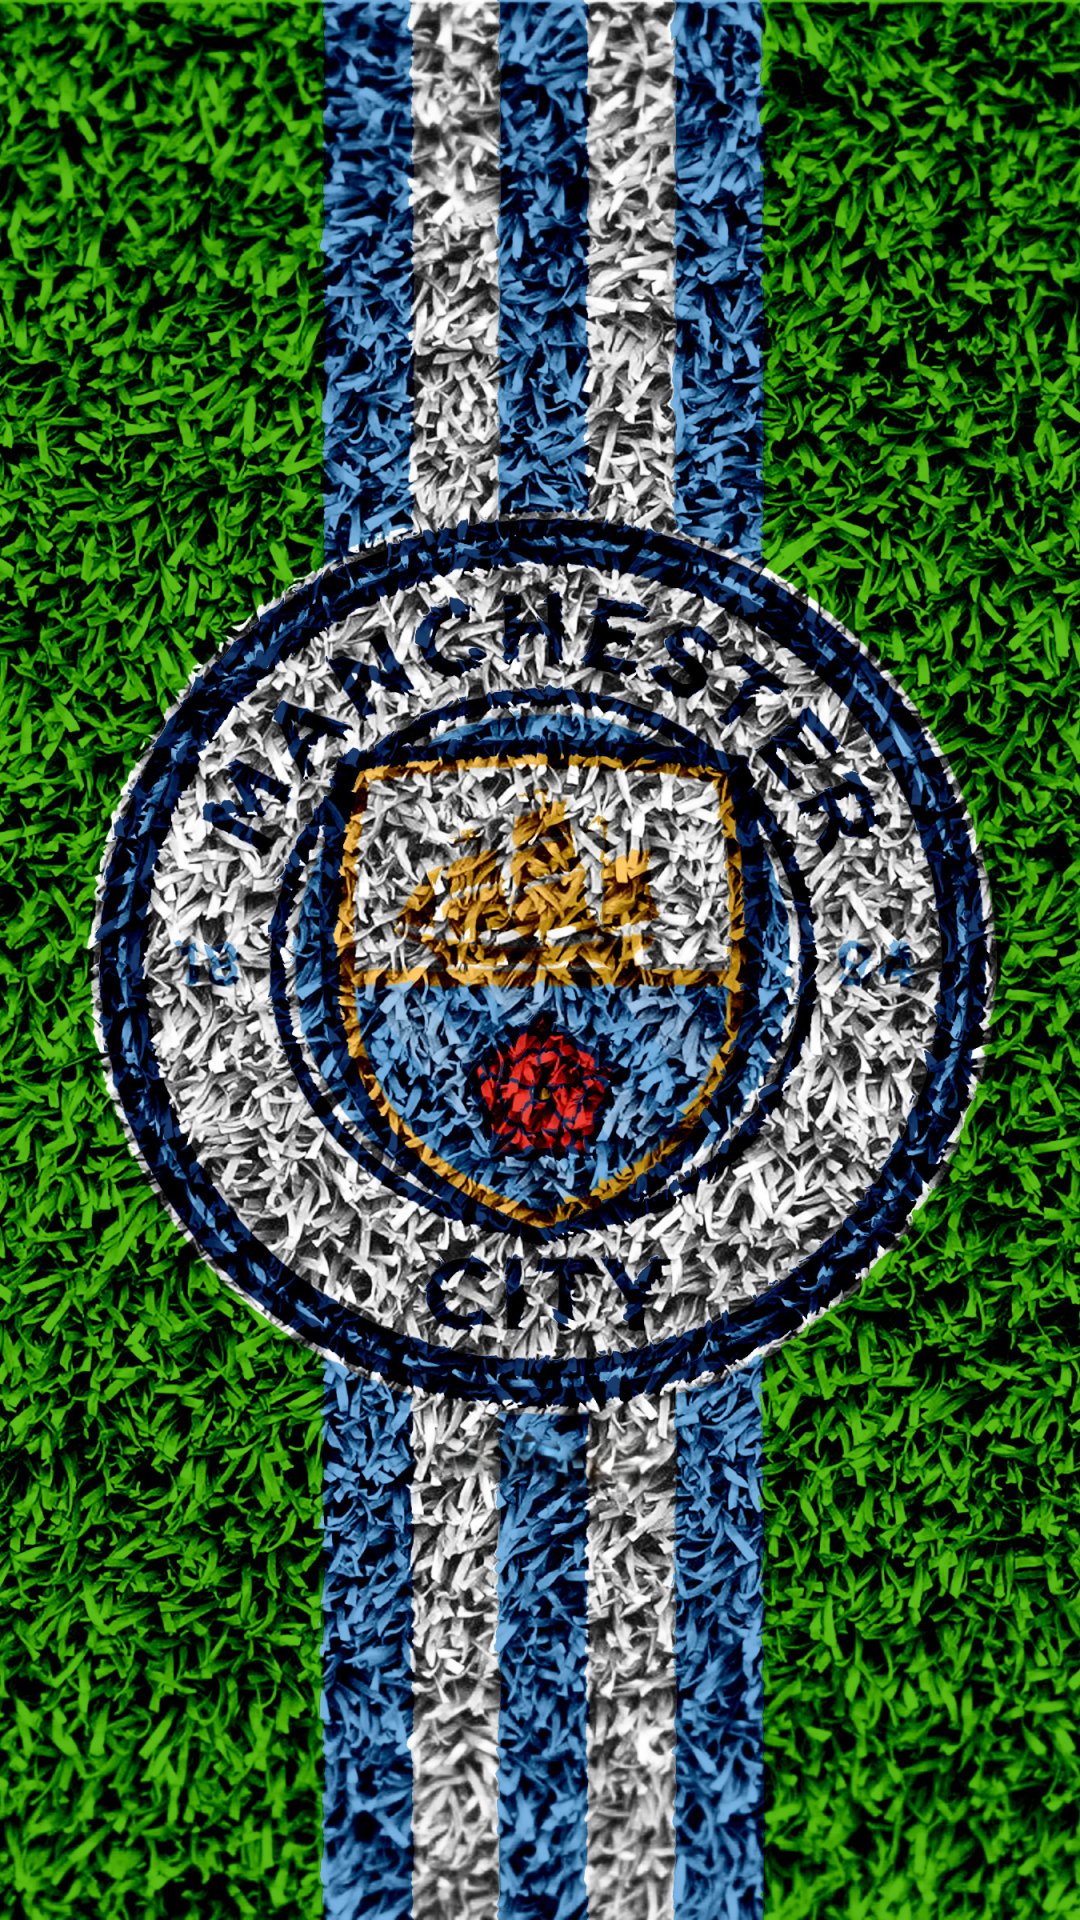 Manchester City 2022 Wallpapers - Wallpaper Cave